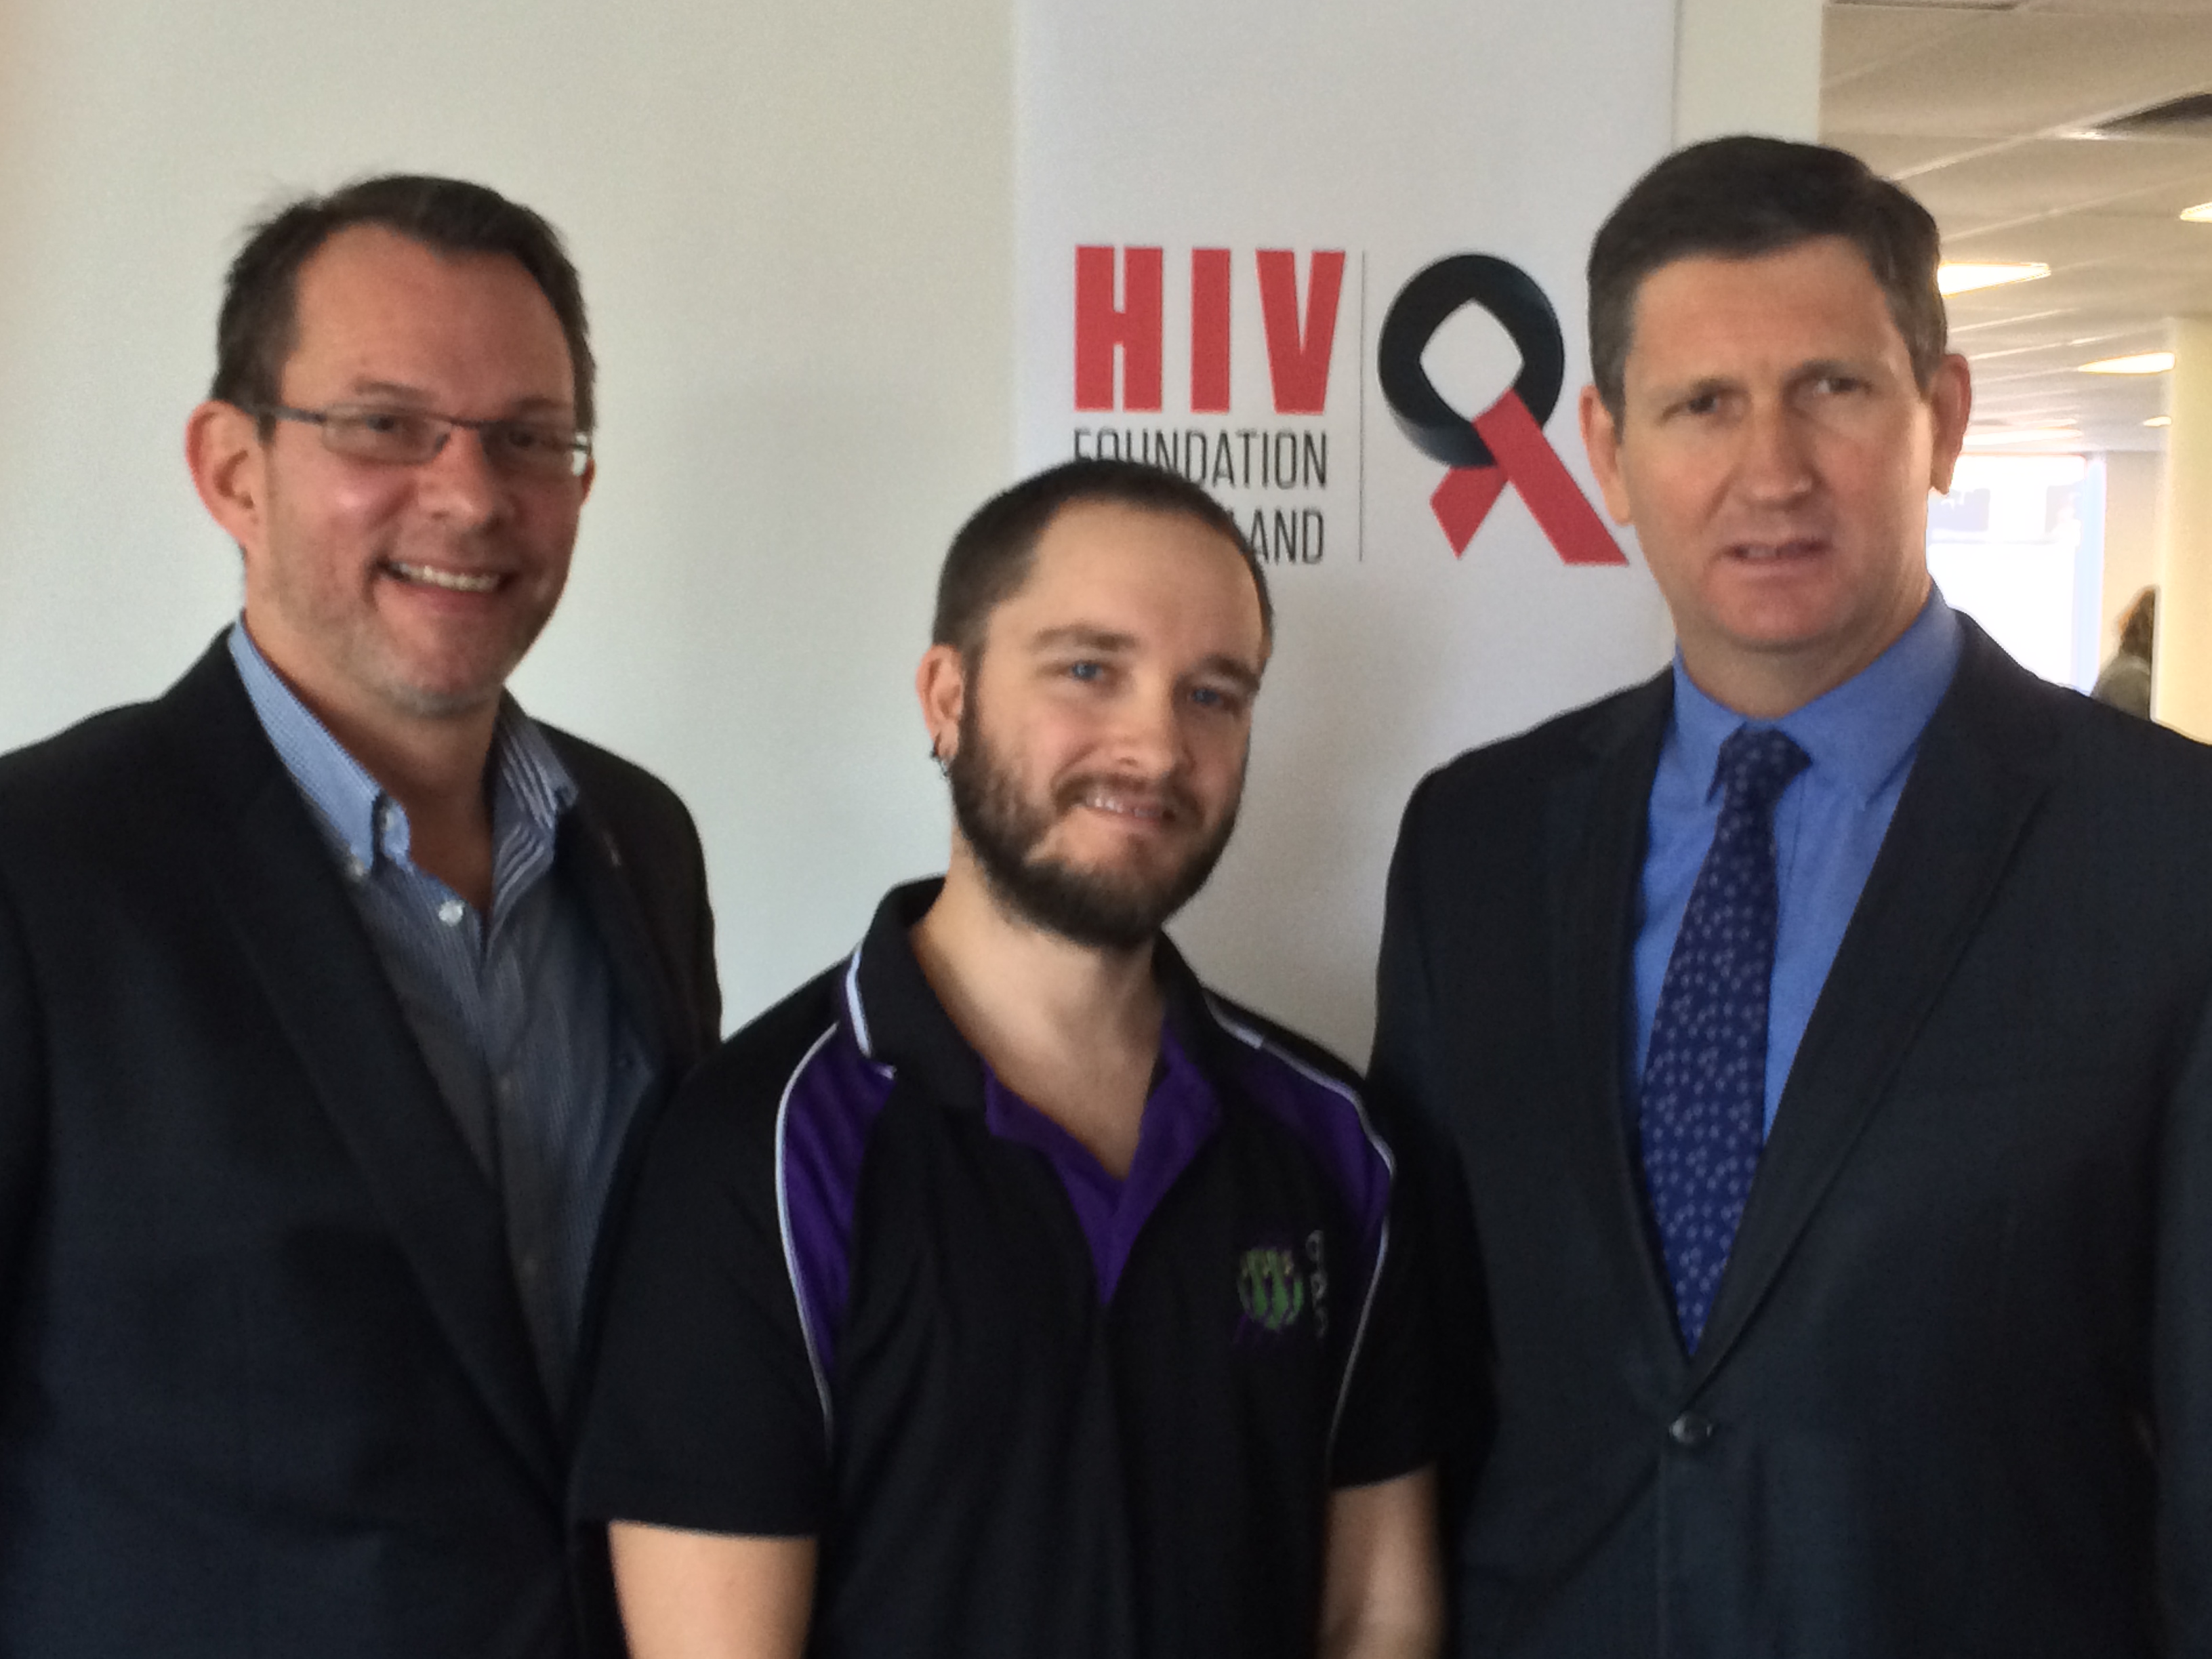 New rapid HIV testing clinic and stigma-tackling campaign for Queensland